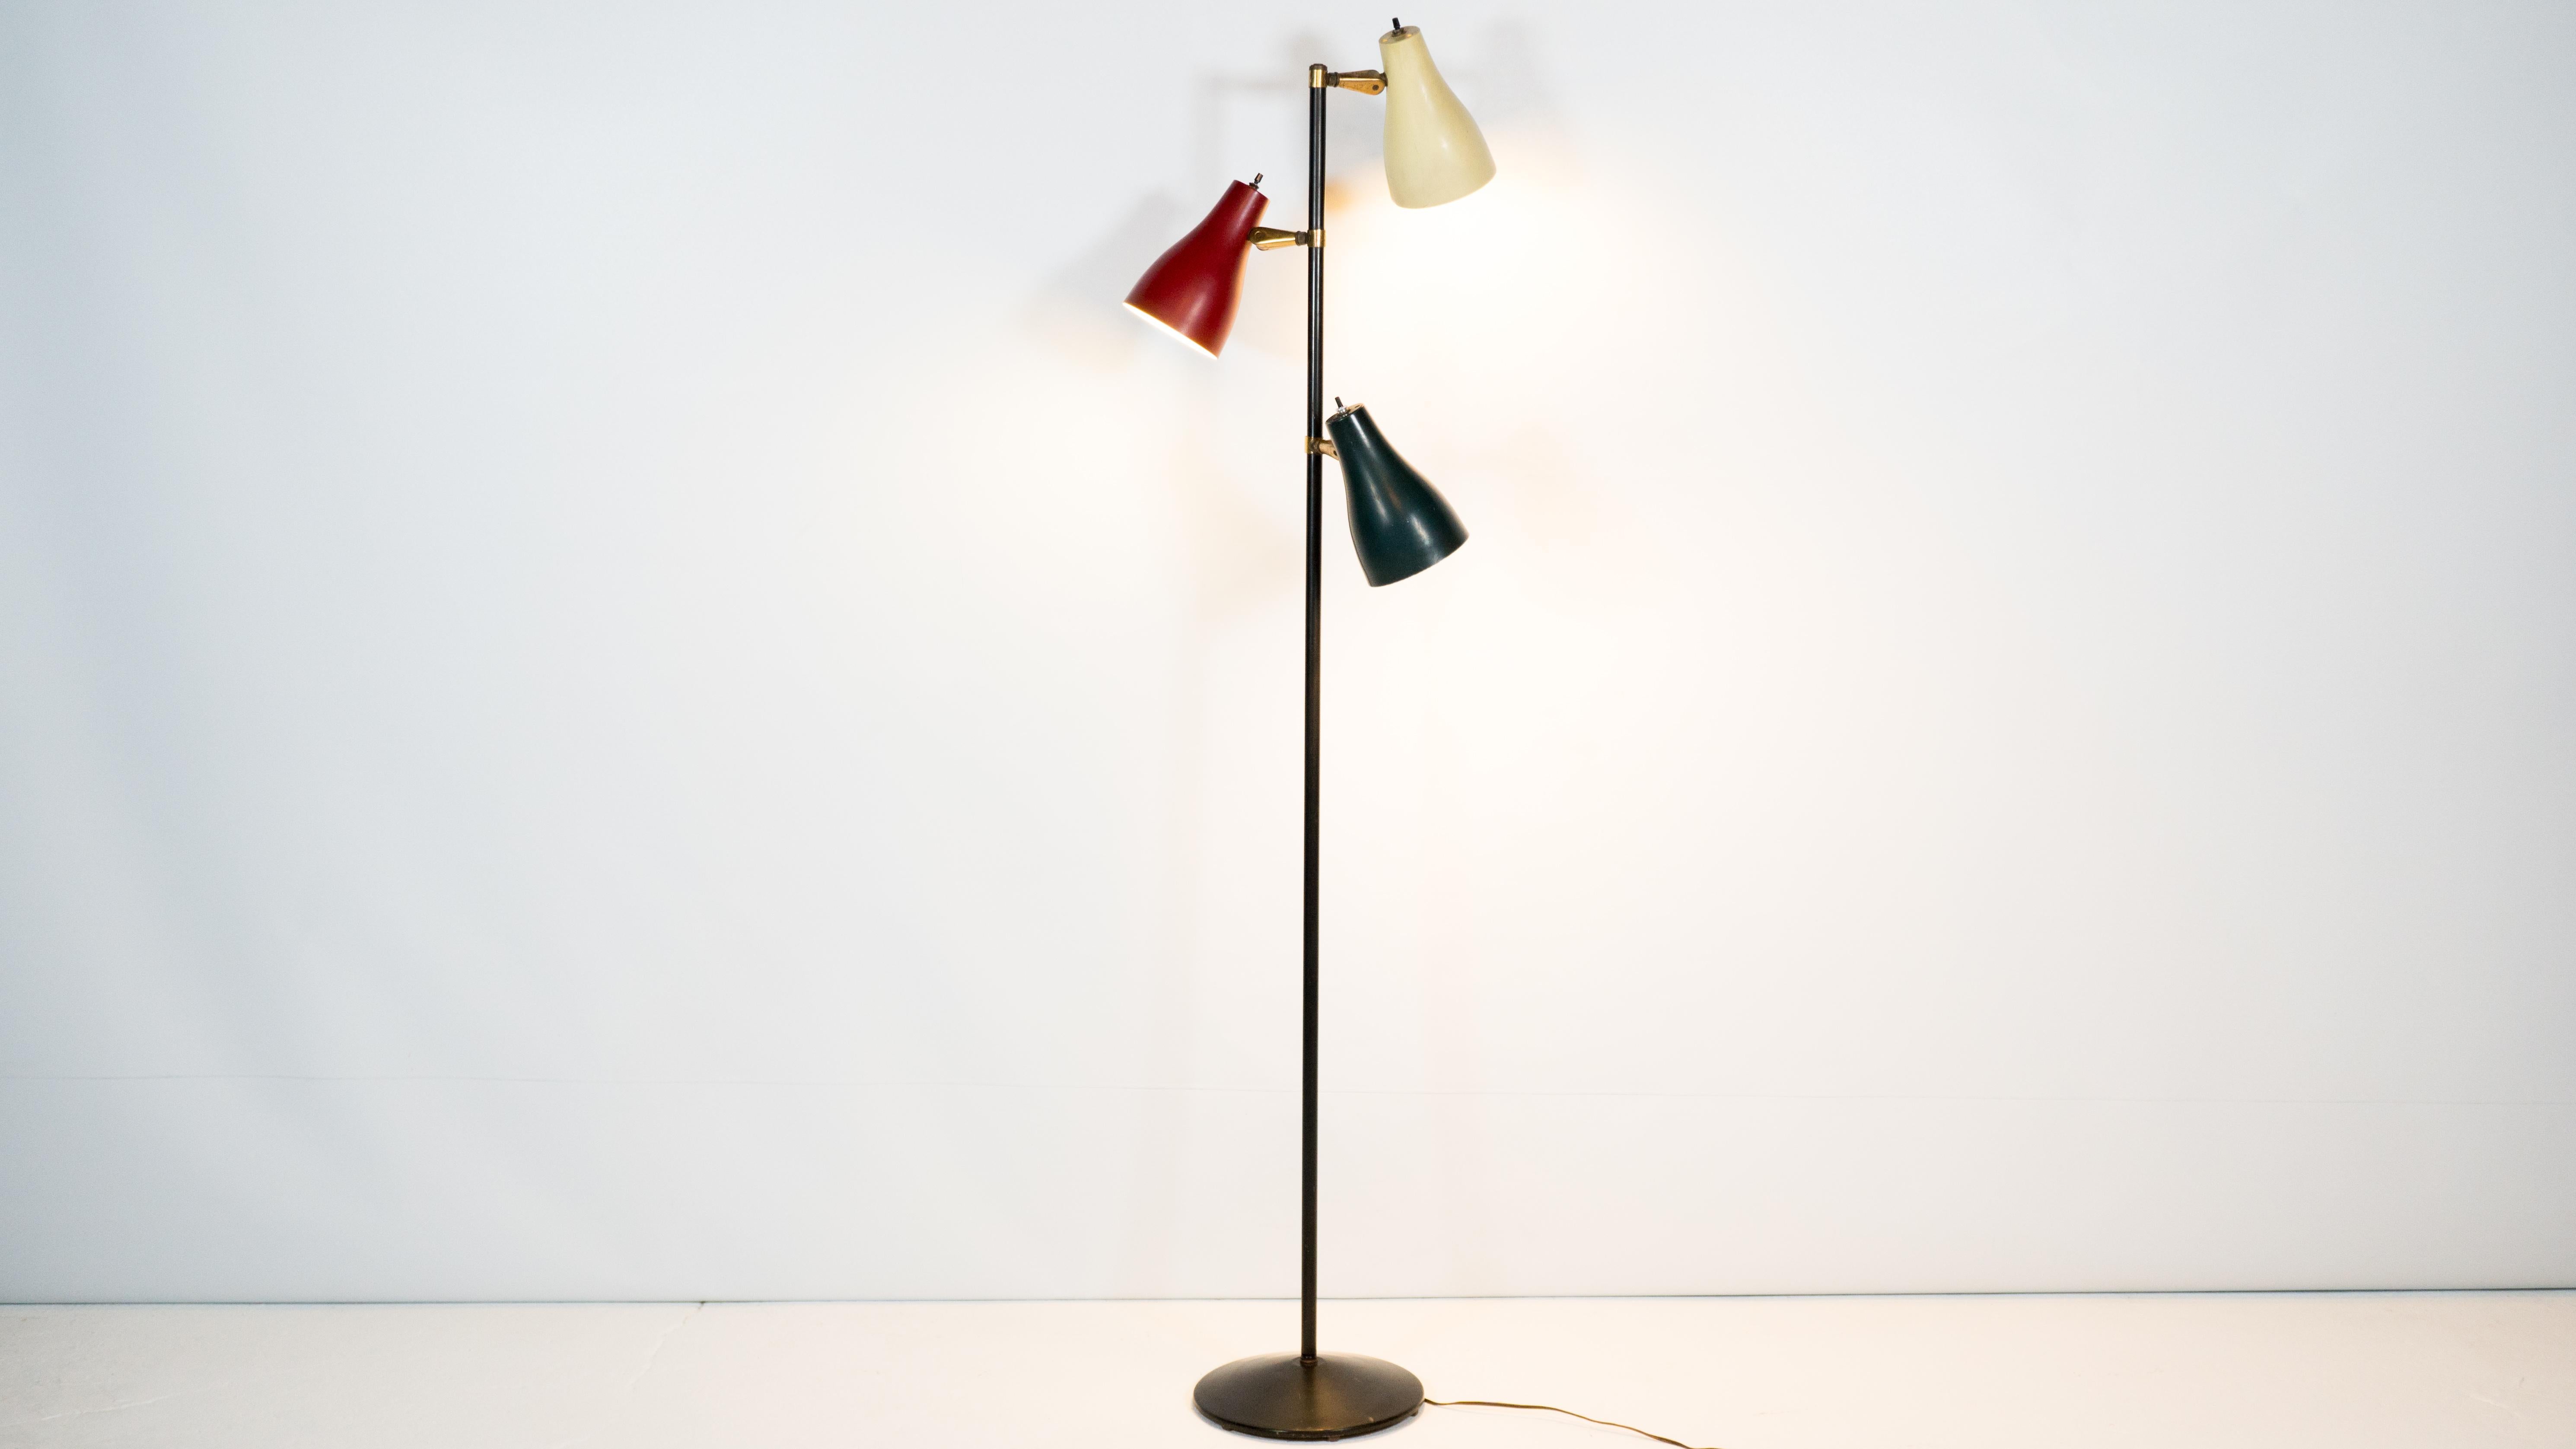 A three headed adjustable pole floor lamp with a dark green, red and creme metal shade, circa 1960s. Rare color combination. The metal pole is in a satin black with round base. Brass ring and arm details, each lamps features twist and turn type